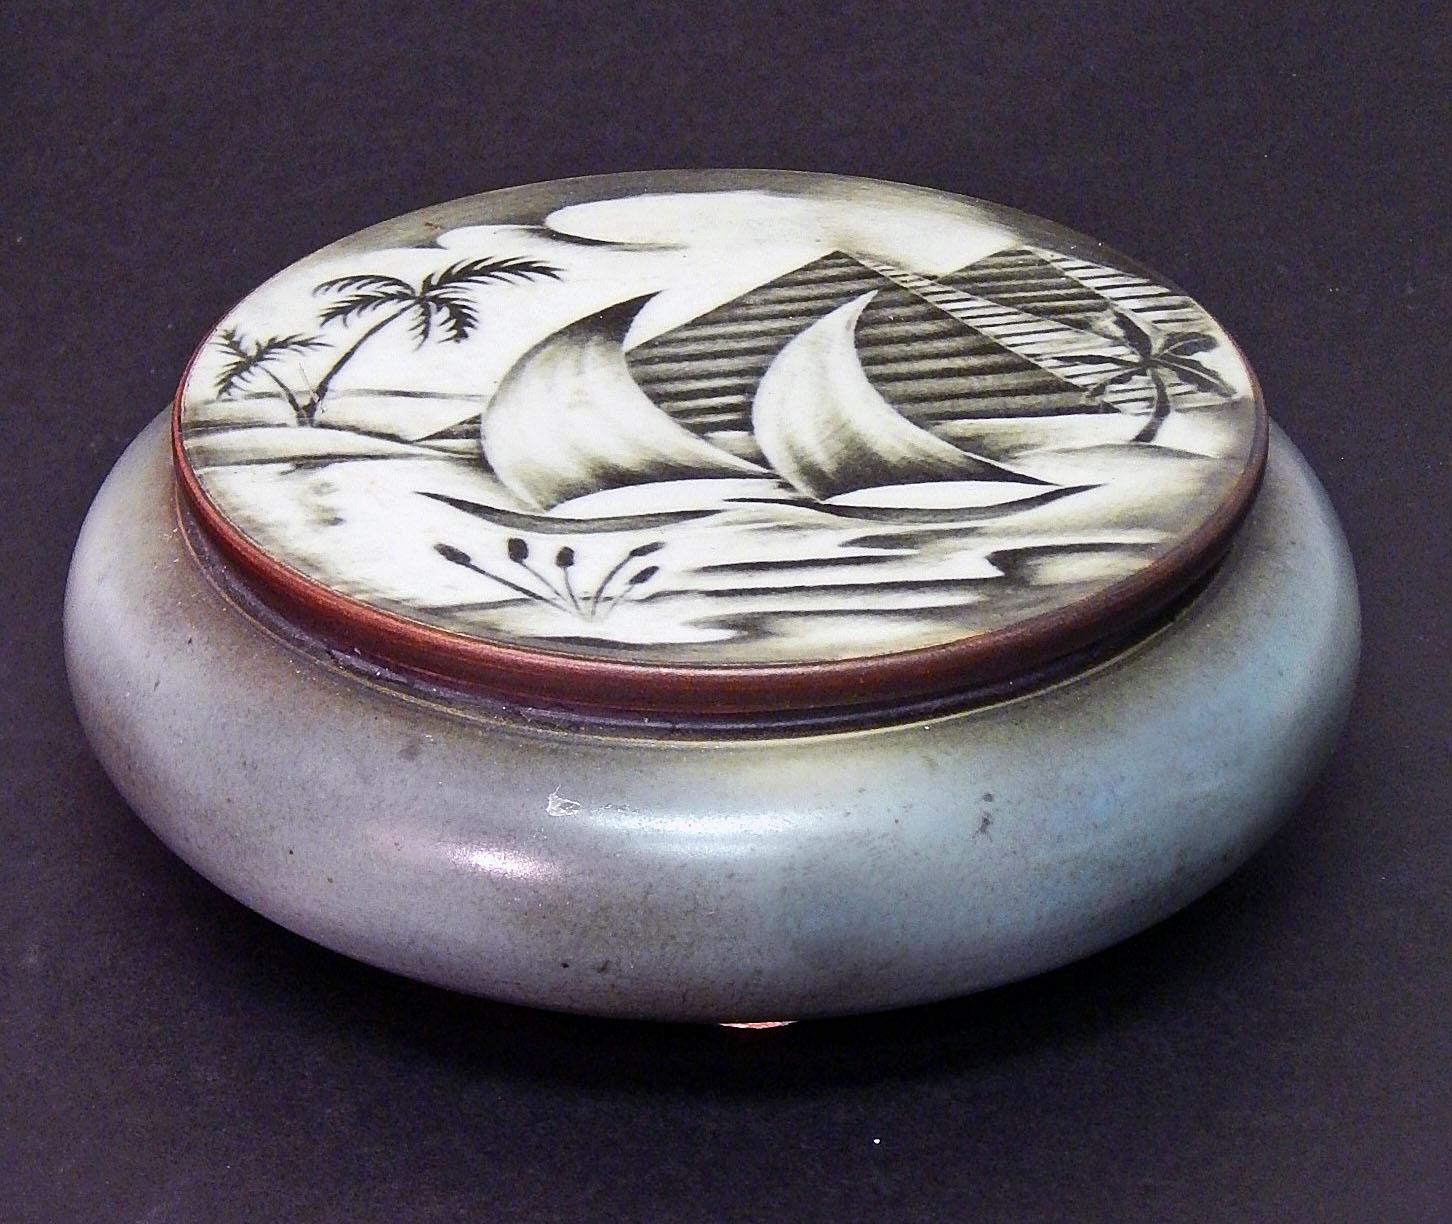 Striking and rare, this round covered Art Deco box depicts two traditional boats with sails on the Nile River, with two of the great Pyramids of Egypt in the background, and palm trees and reeds along the river's edge. This piece was designed by